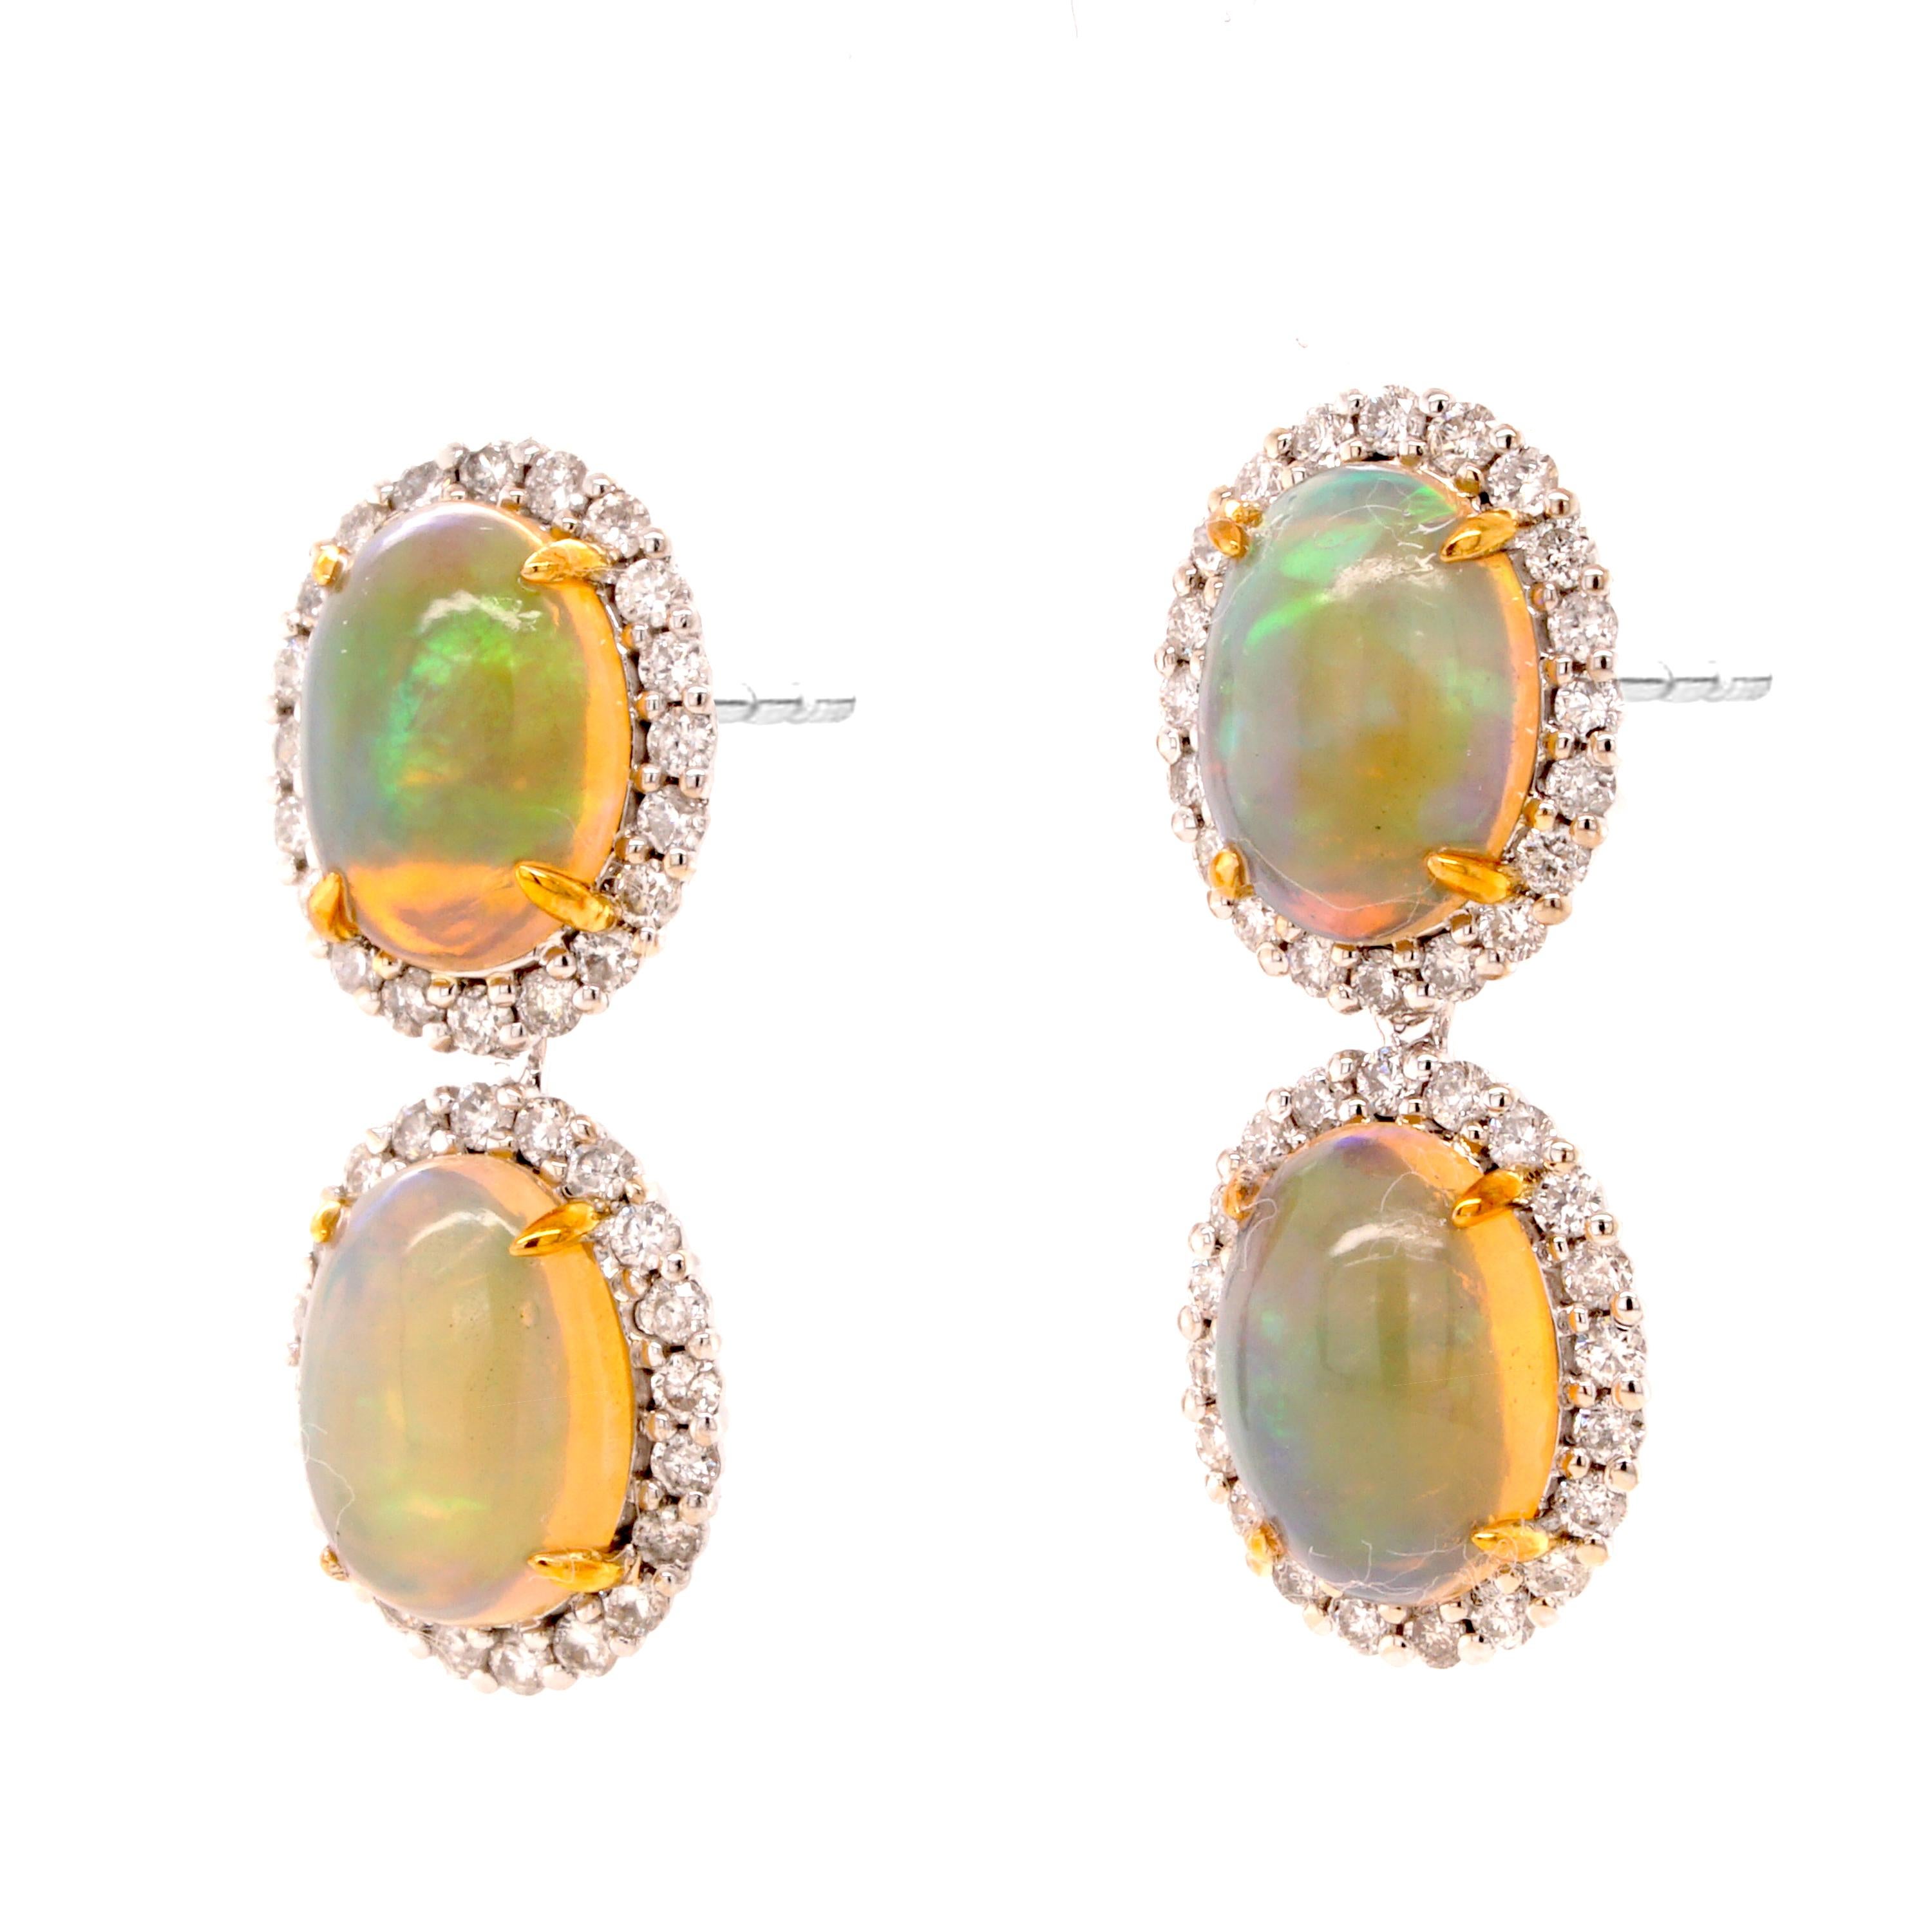 Opalescent earrings in 18ct white gold and accents of yellow gold. Featuring 3ct opals bordered with 0.56ct diamonds.

- Dimensions (HxW): 22 x 9mm
- Weight per earring: 2.2gm
- Fitting: post and butterfly

Fei Liu Fine Jewellery is an independent